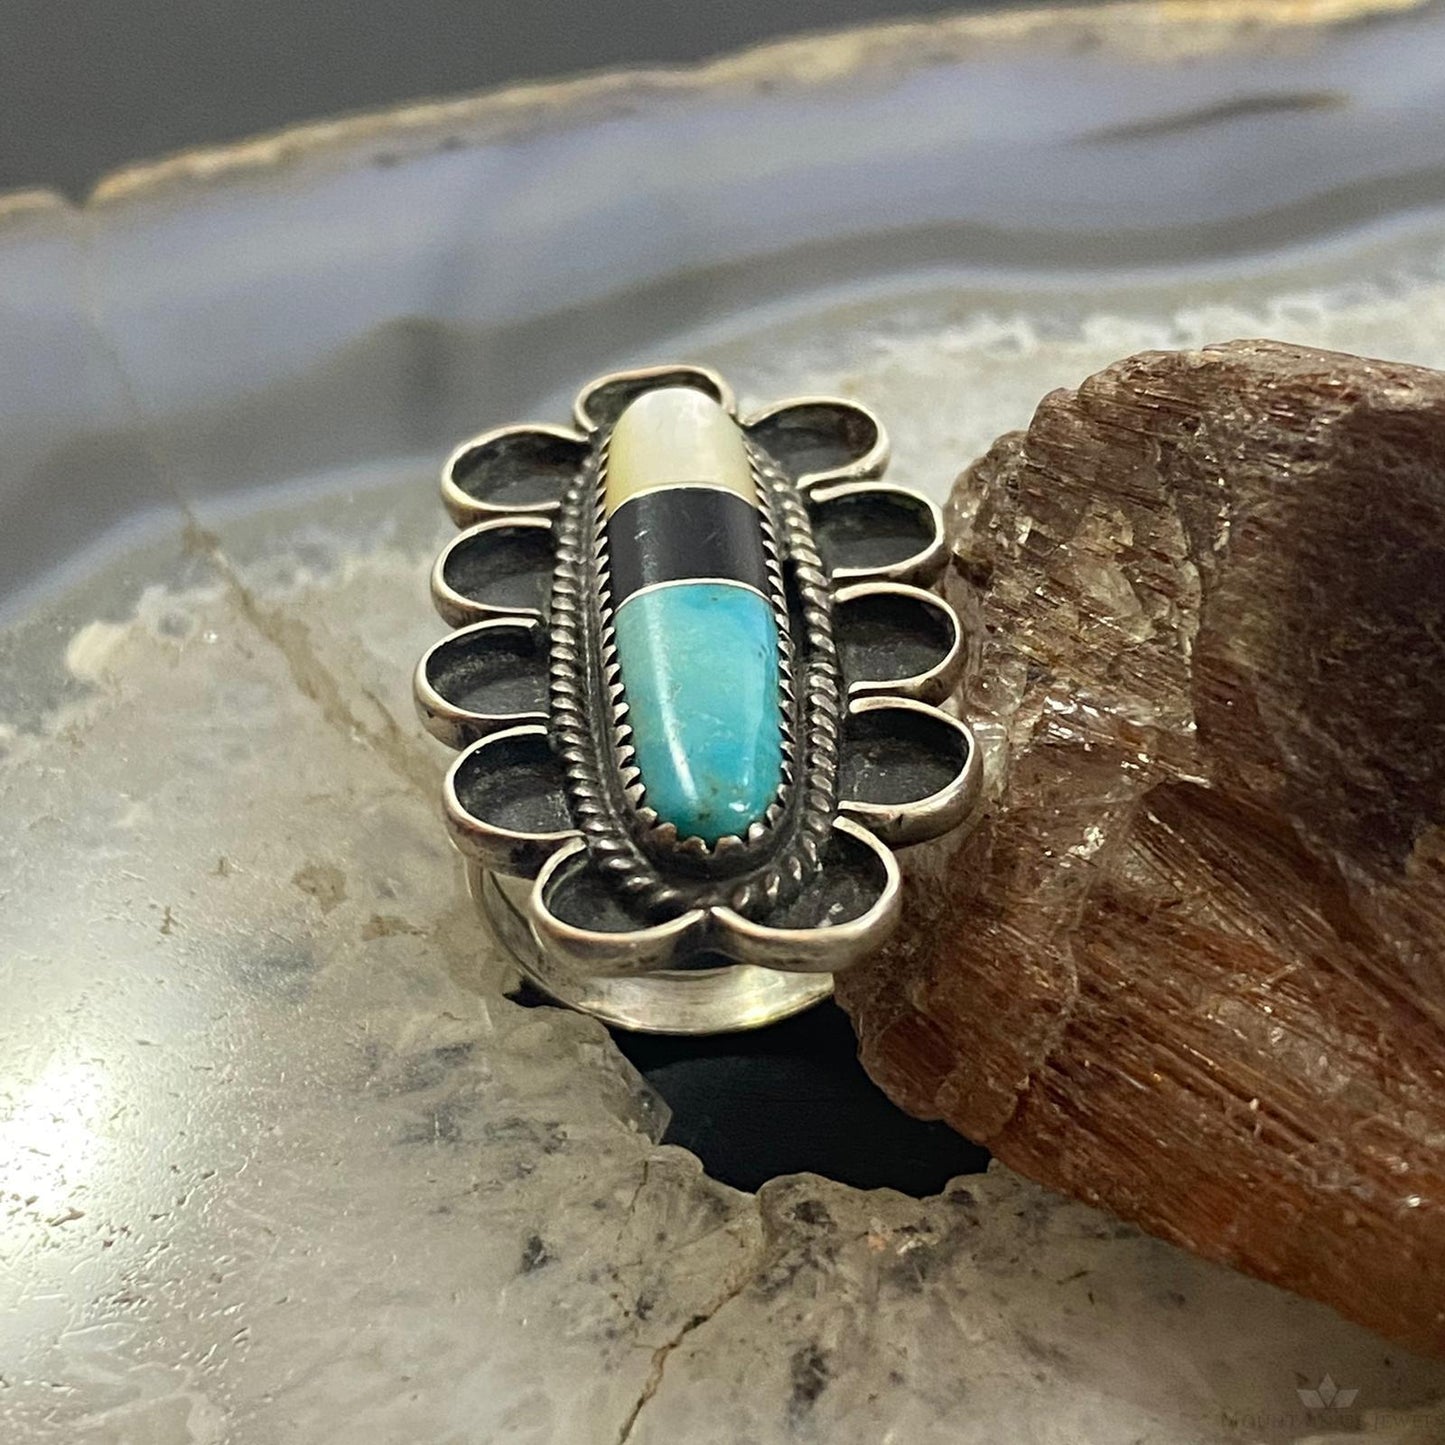 Vintage Native American Silver Oblong Multi stone Inlay Decorated Ring Size 7.75 For Women